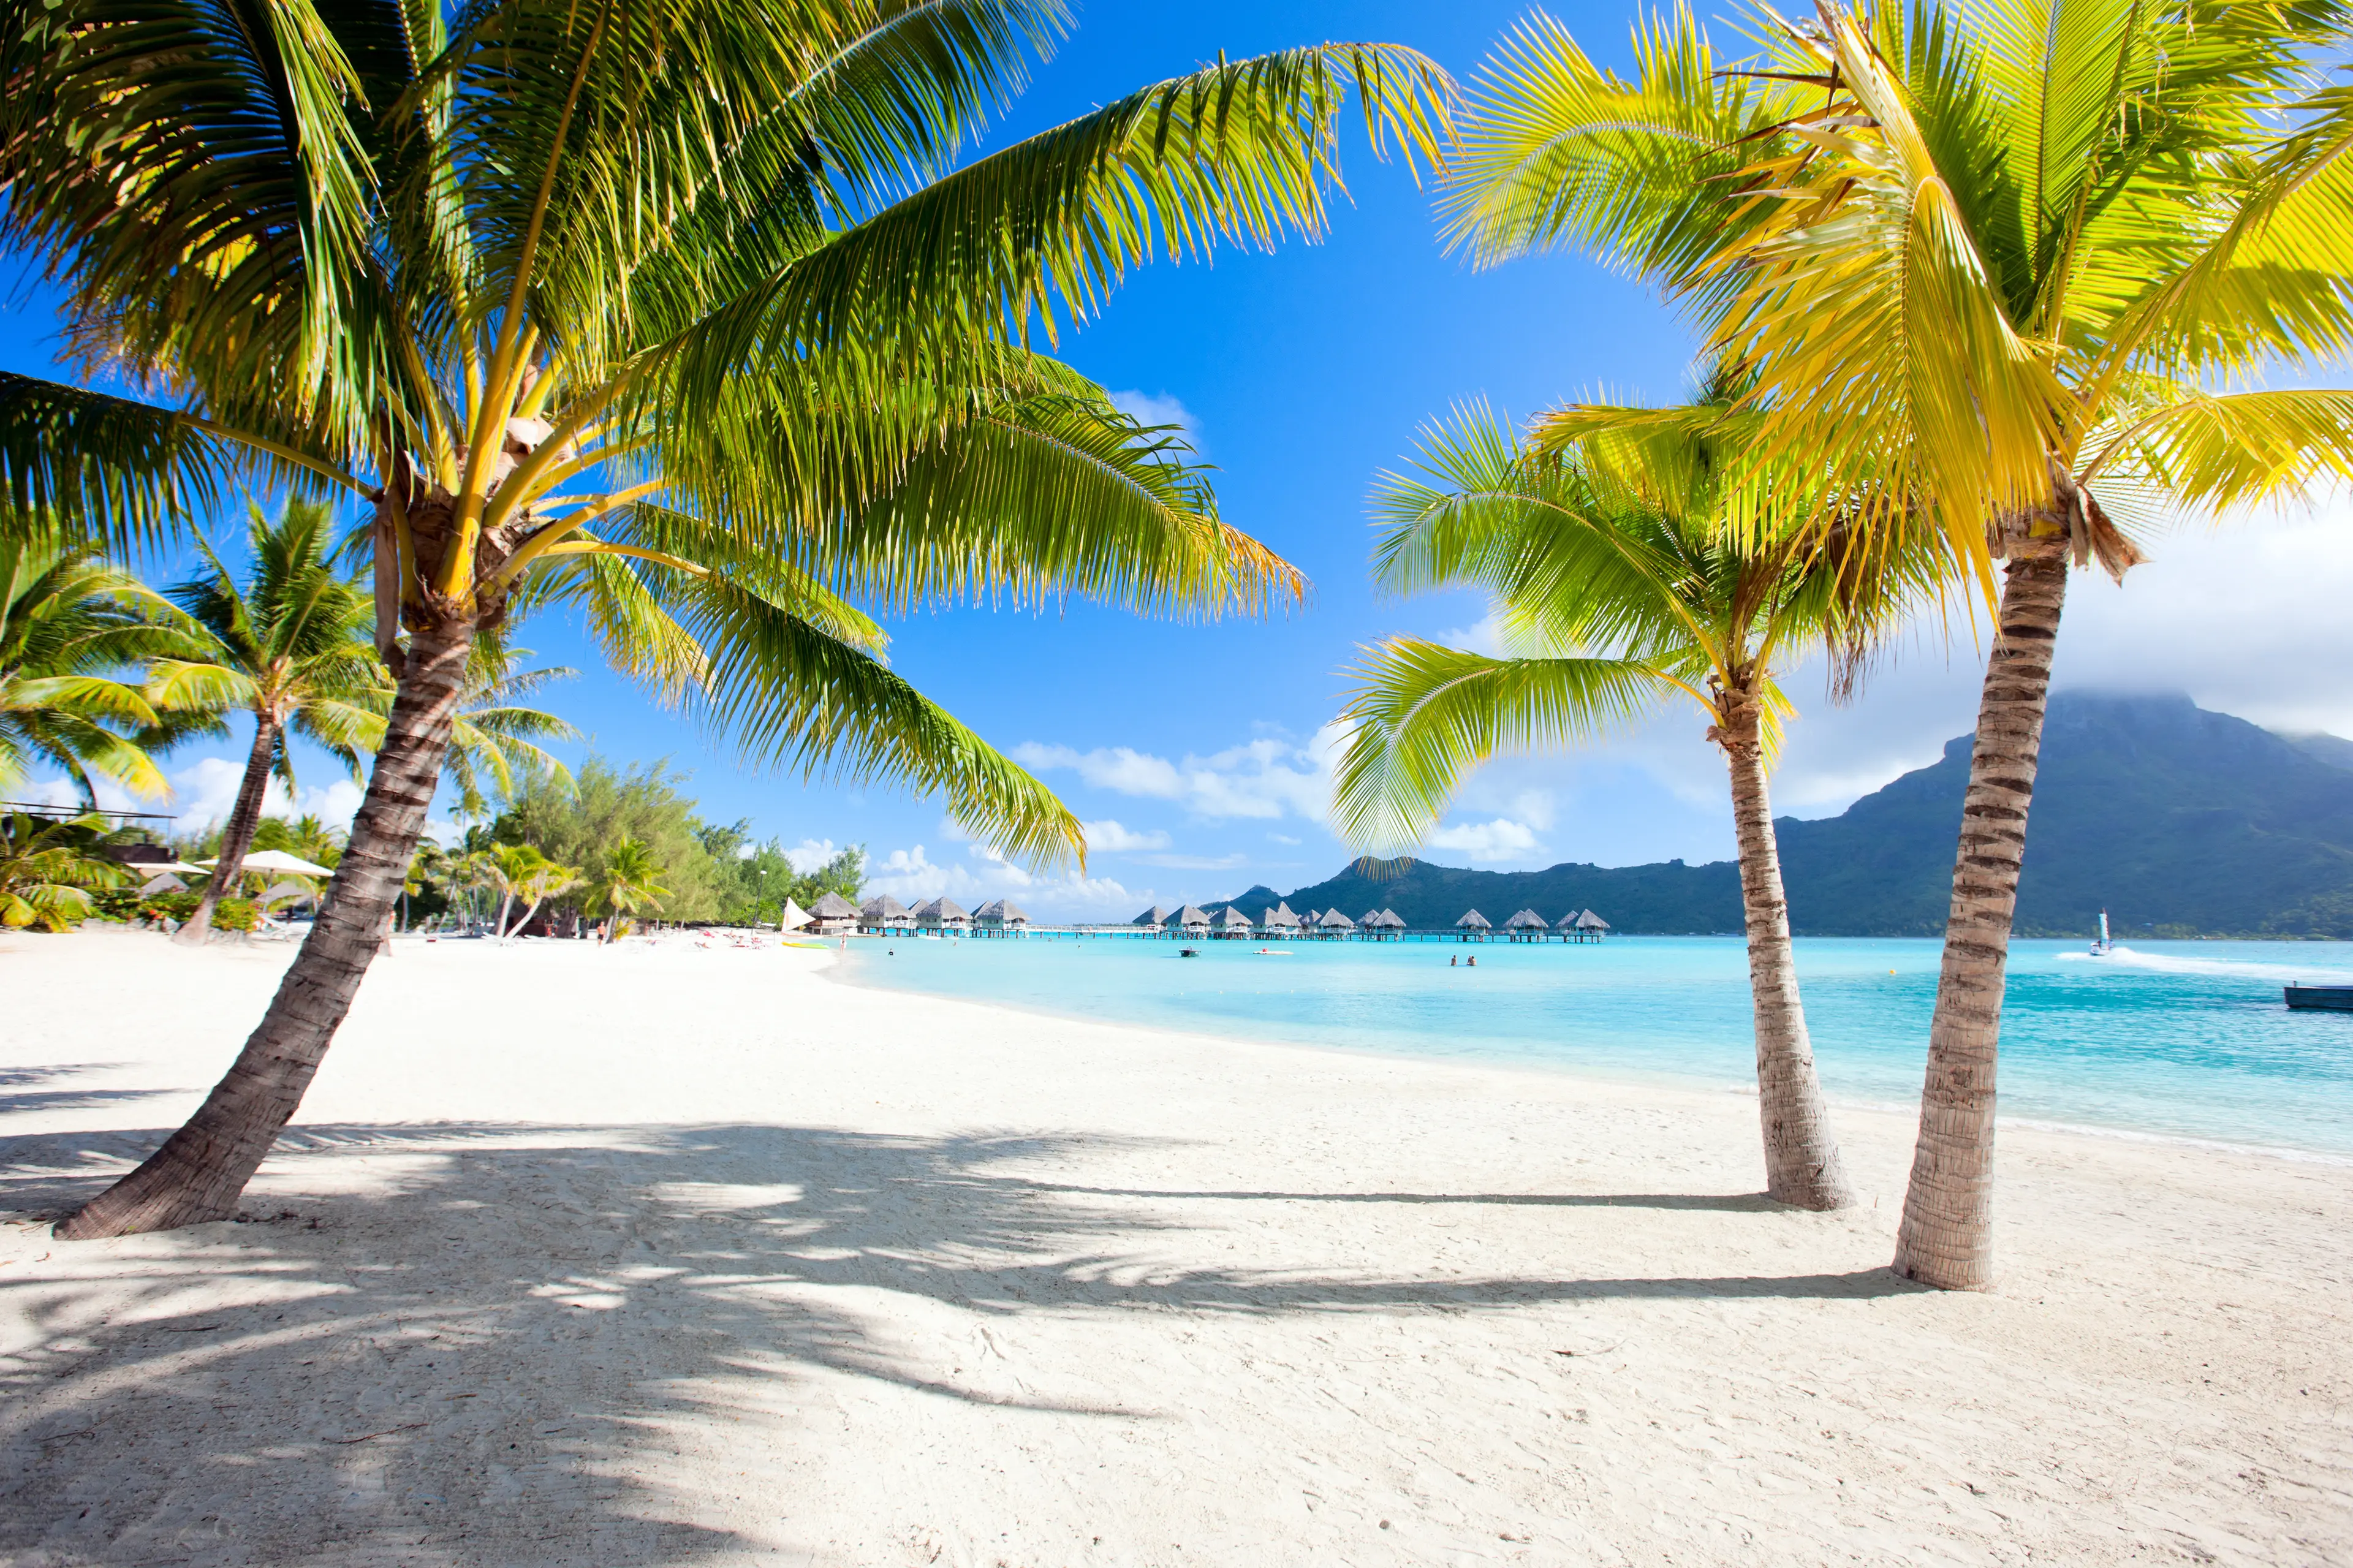 4-Day Local Family Experience in Bora Bora: Gourmet and Sightseeing